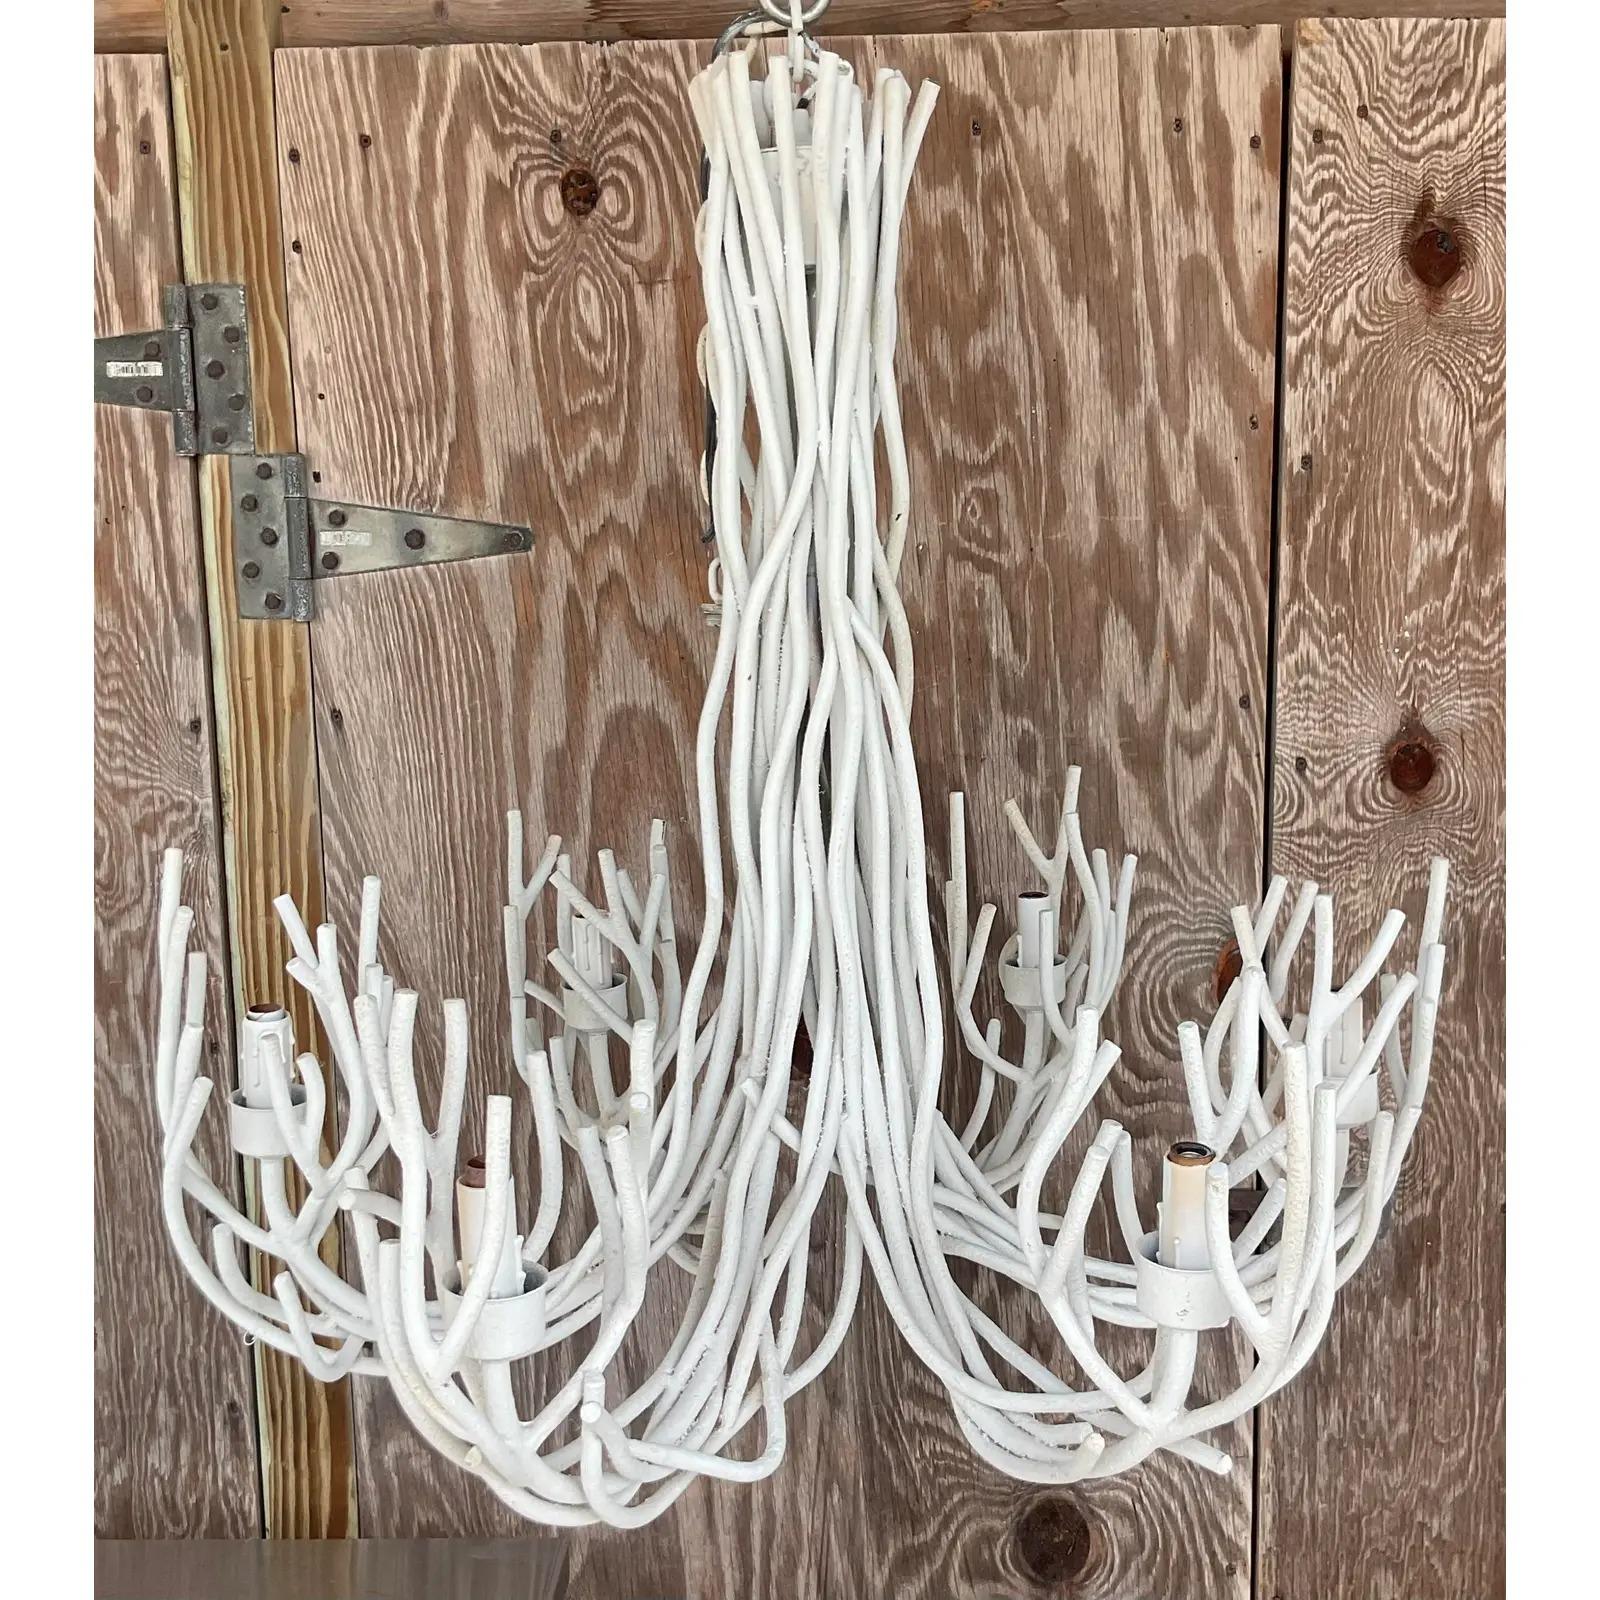 A fabulous vintage Boho chandelier. A chic twig design made with long metal rods. Painted white finish. Acquired from a Palm Beach estate.